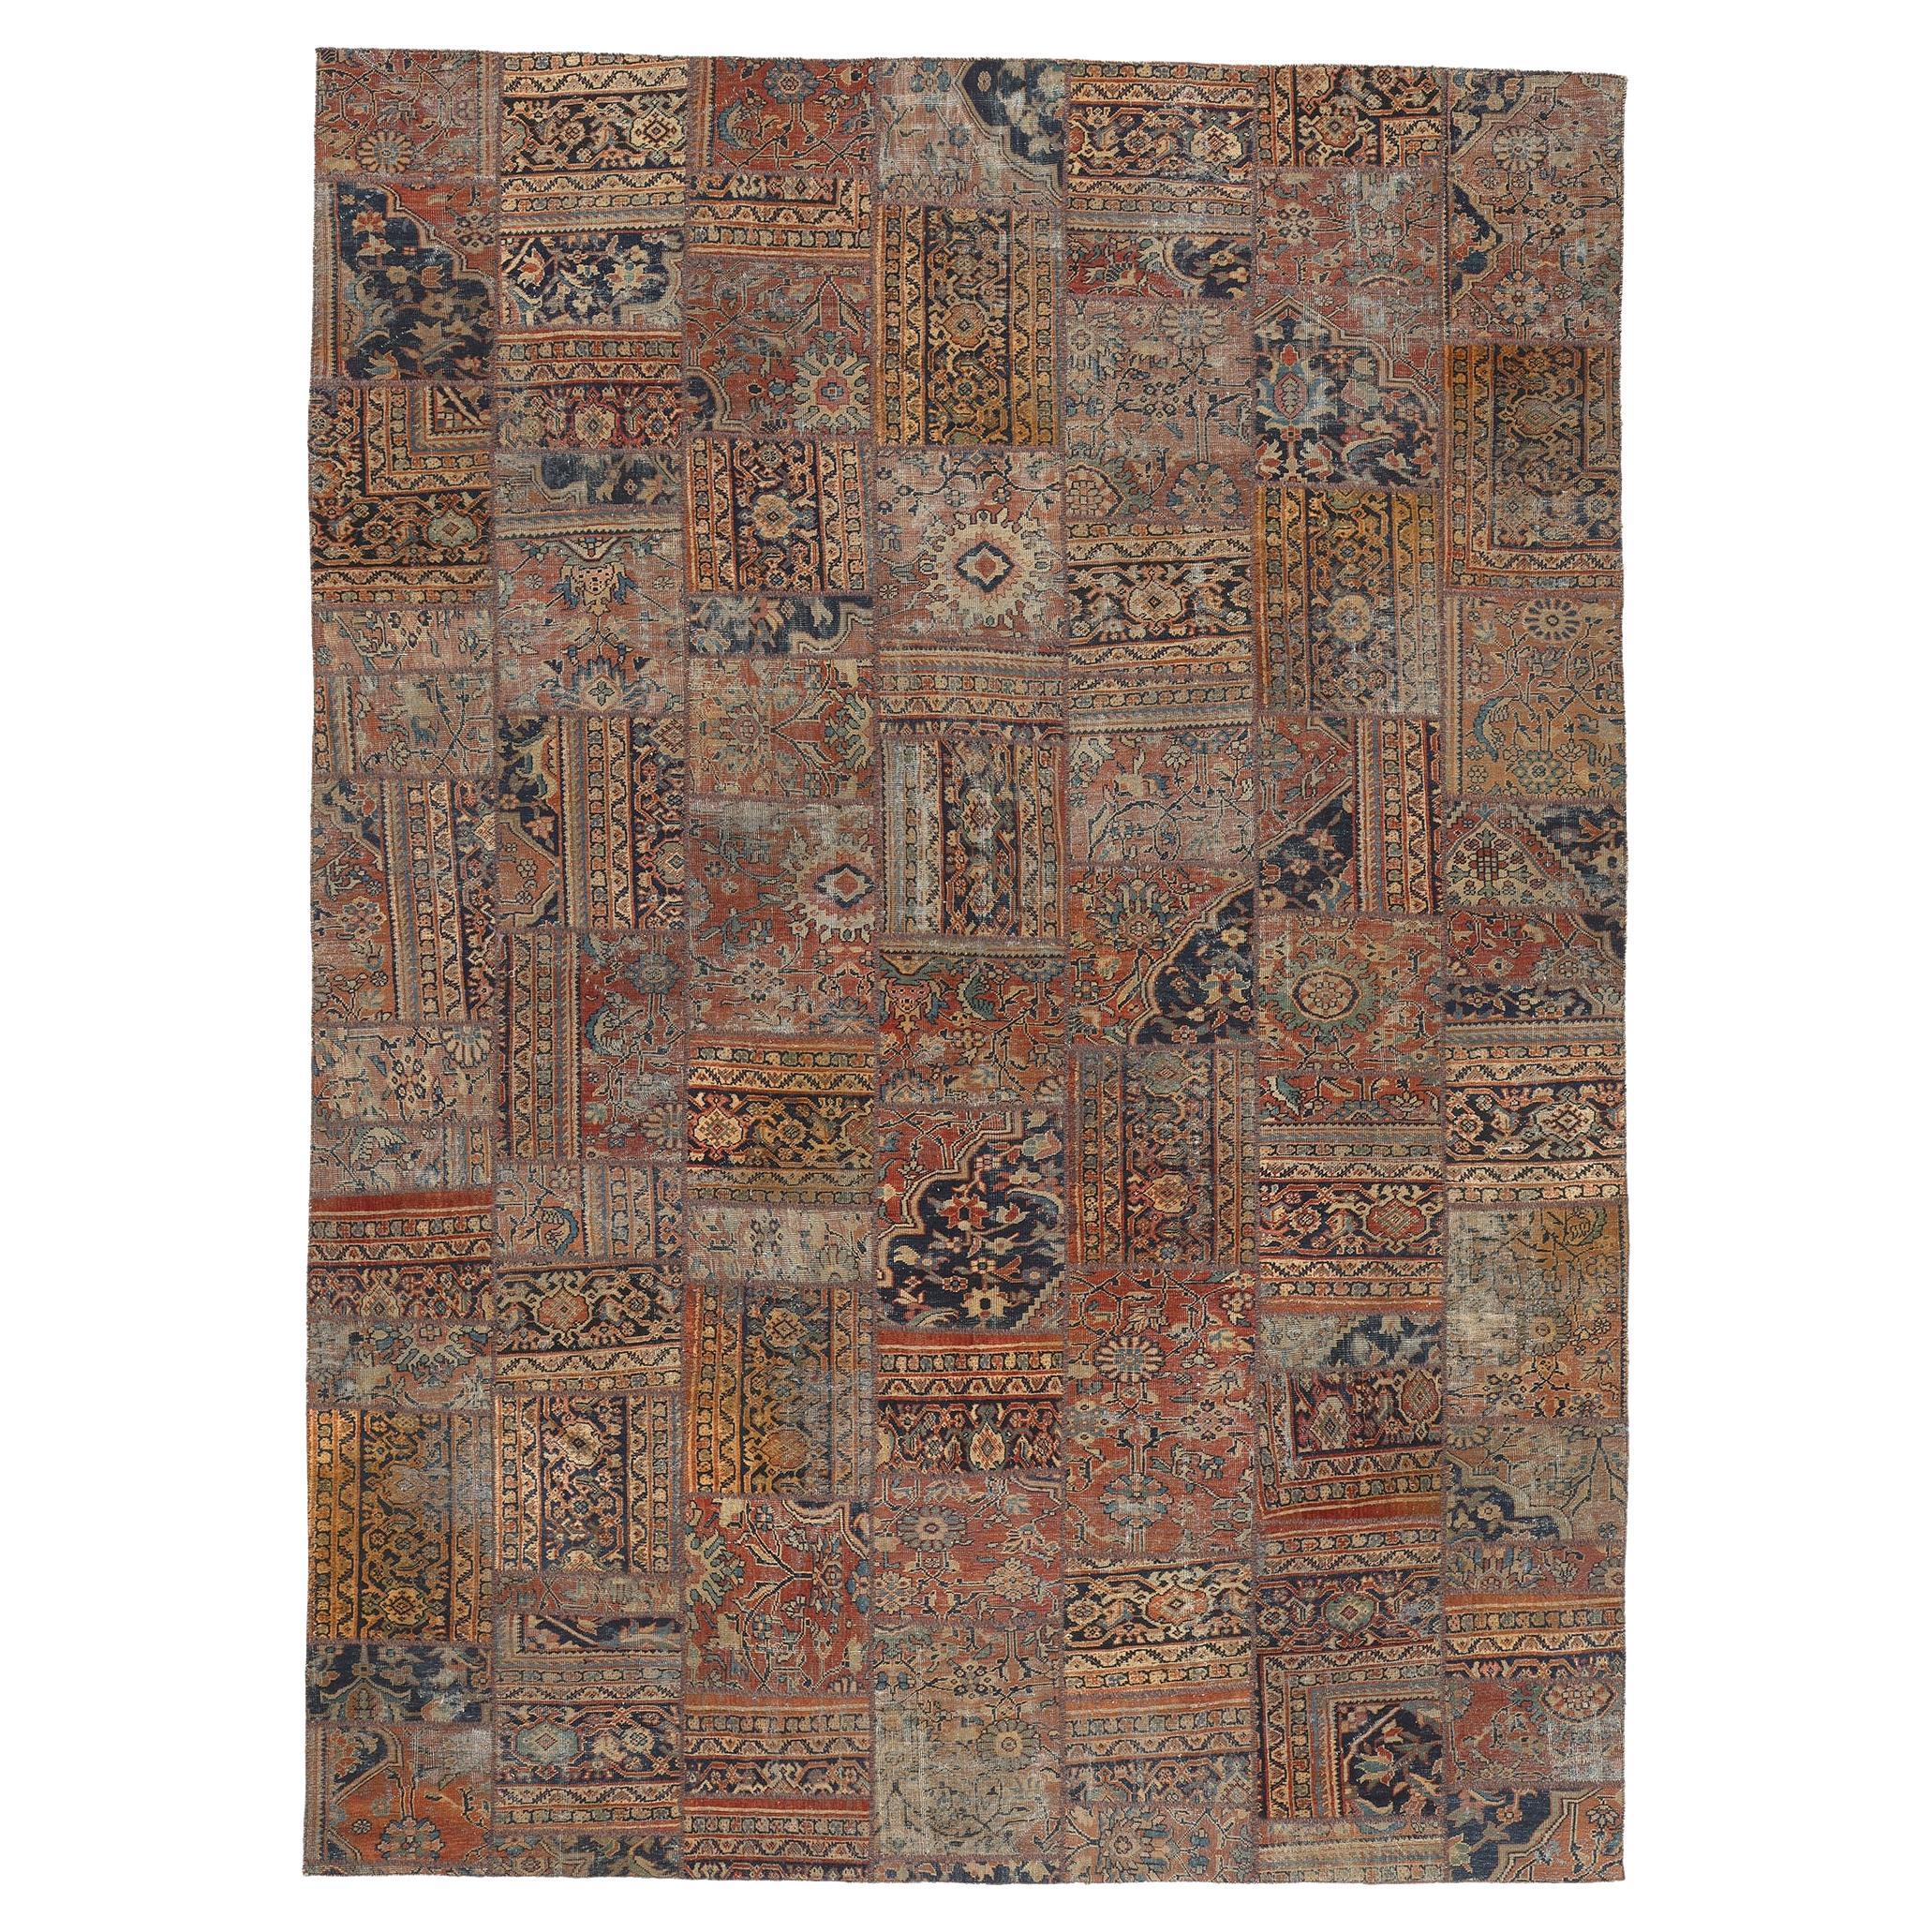 Vintage Persian Mahal Rug, Rugged Beauty Meets Rustic Modern Industrial For Sale